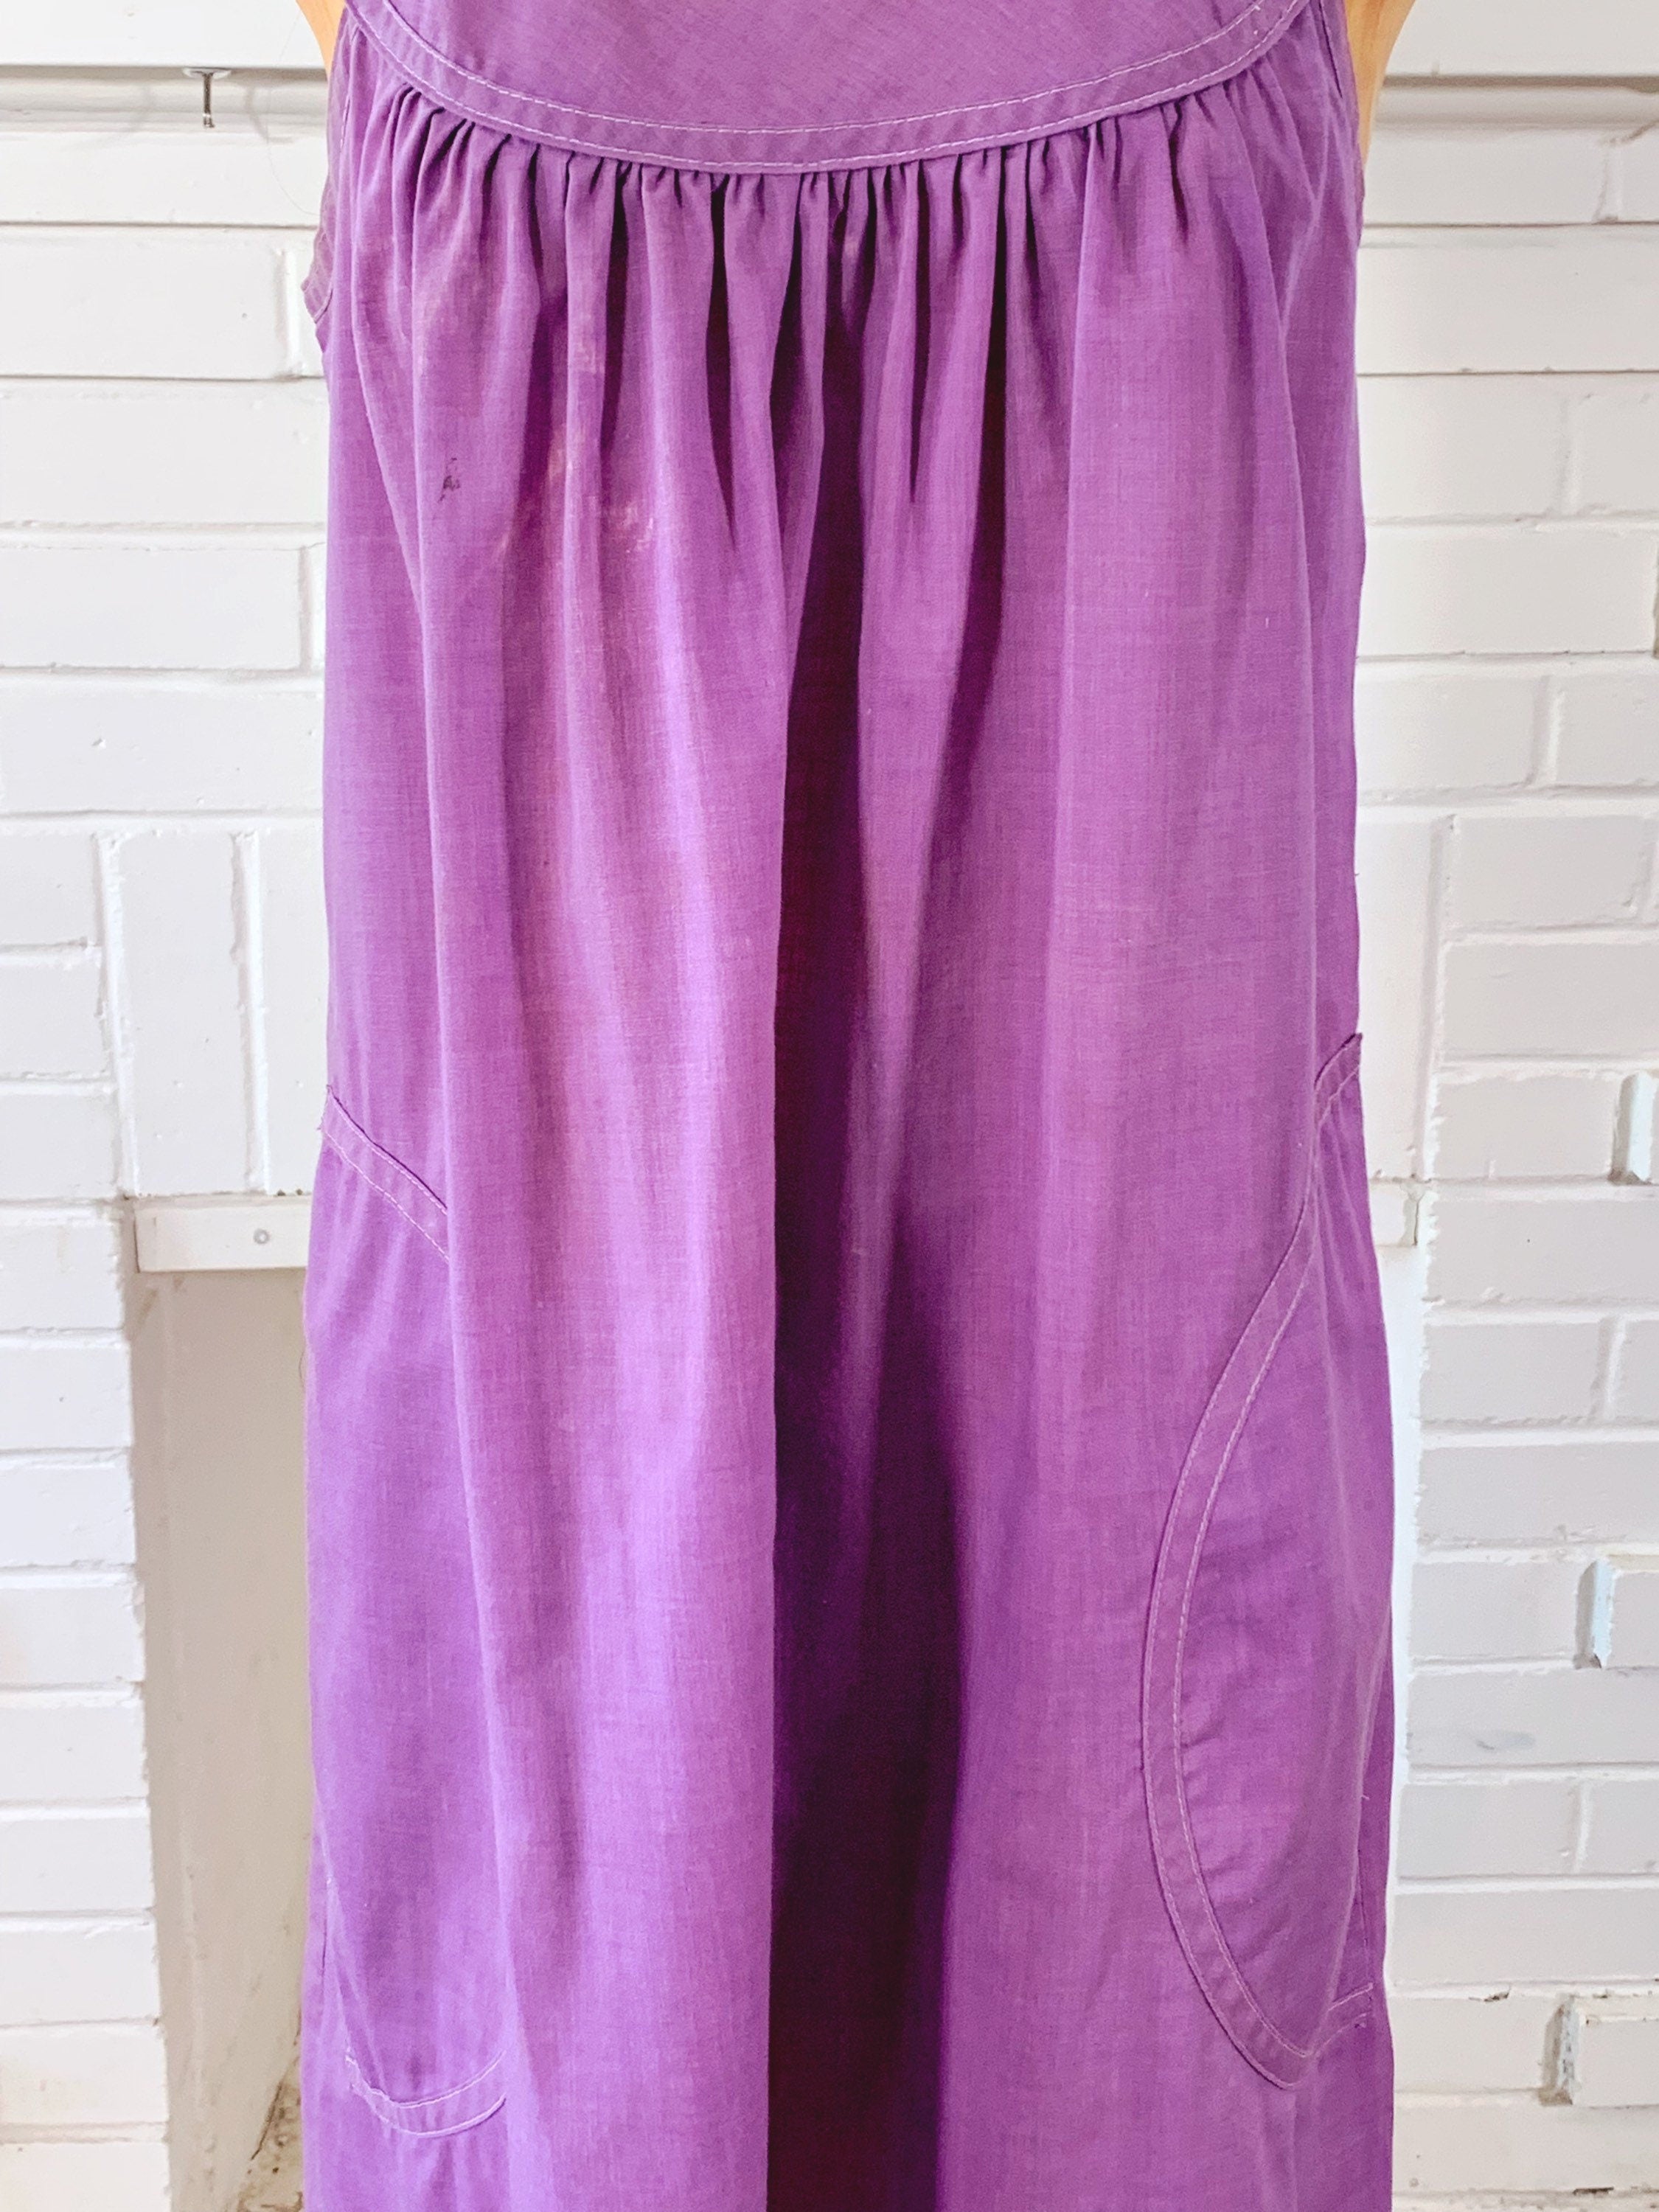 Vintage 1970s Purple Apron Dress by Rosemary Long for New Perspective with Pockets | Size S-M | Spring Outing Casual Dress Boho Chic